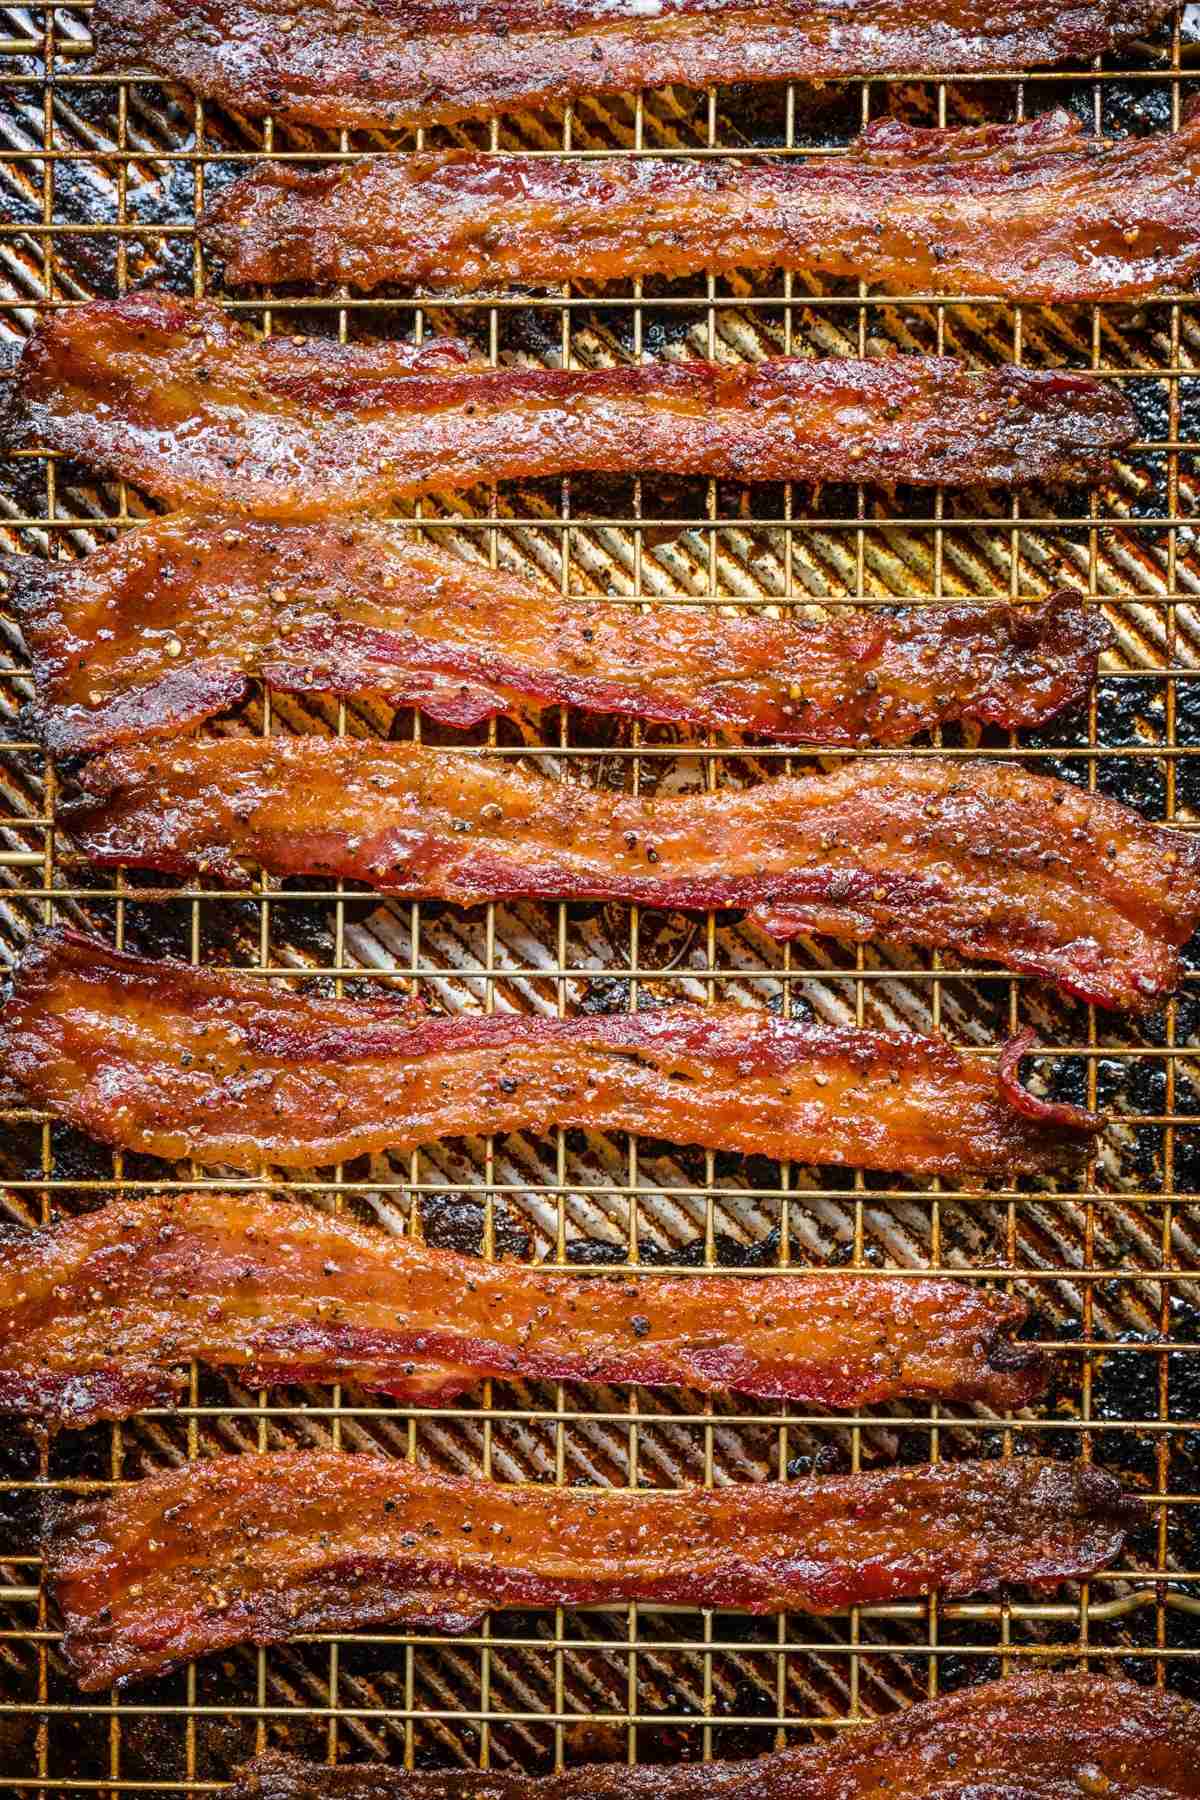 Candied Bacon on wire rack w/ baking sheet